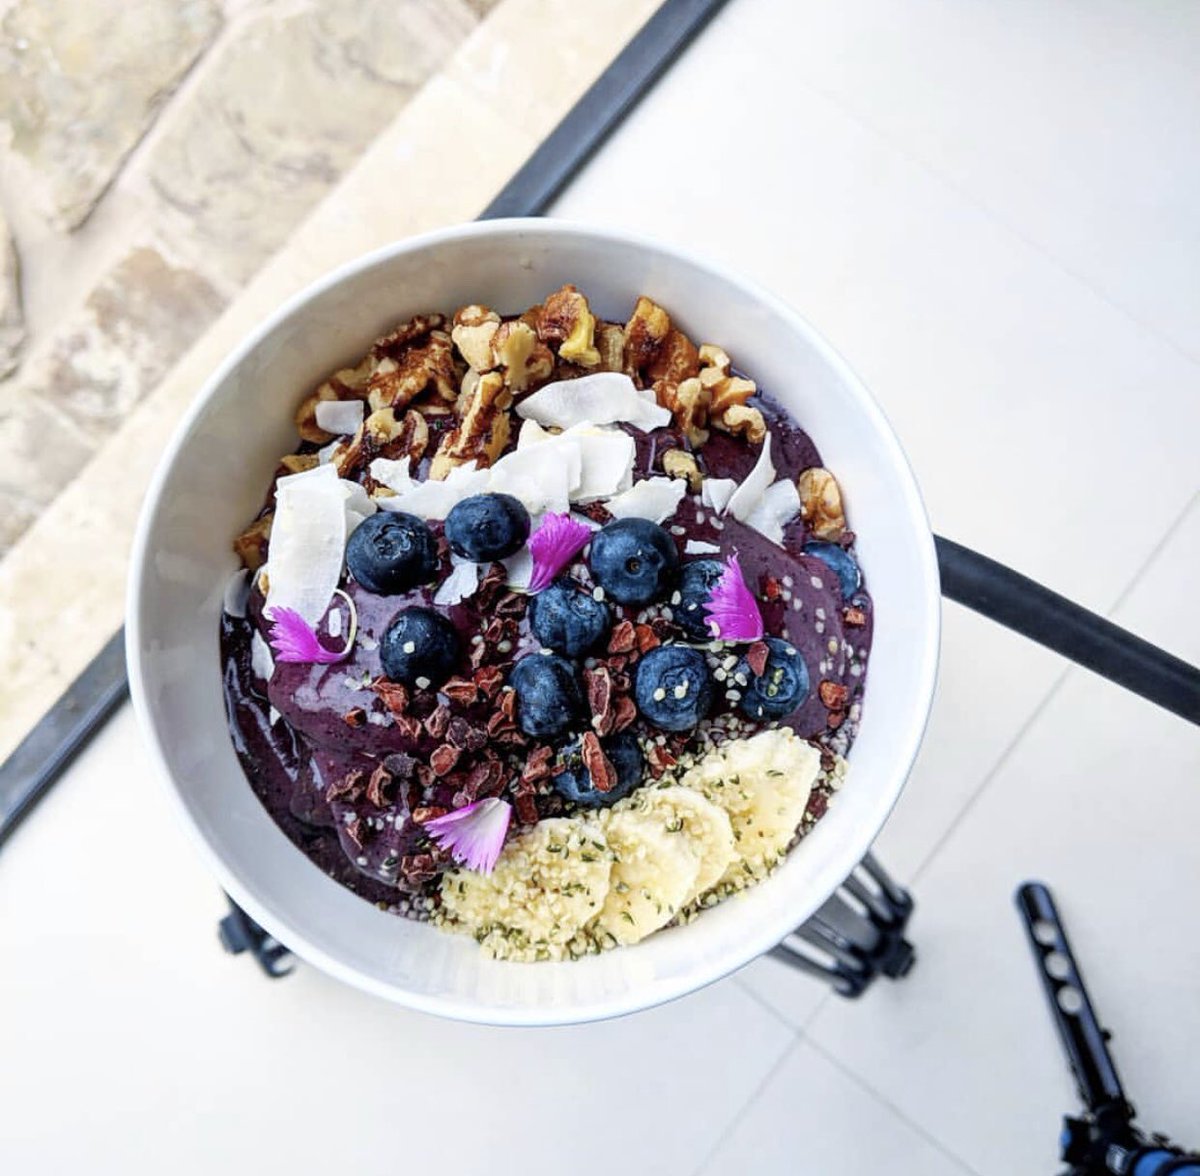 The world keeps on spinning but that doesn’t mean you can’t stop and take a break with a breakfast ‘Morning Glory Bowl.’

#TBT from our Summer Malibu Retreat

#breakfastbowls #healthybreakfasts #simplerecipes #wellnessretreats #faithbasedretreats #seasonalwellness